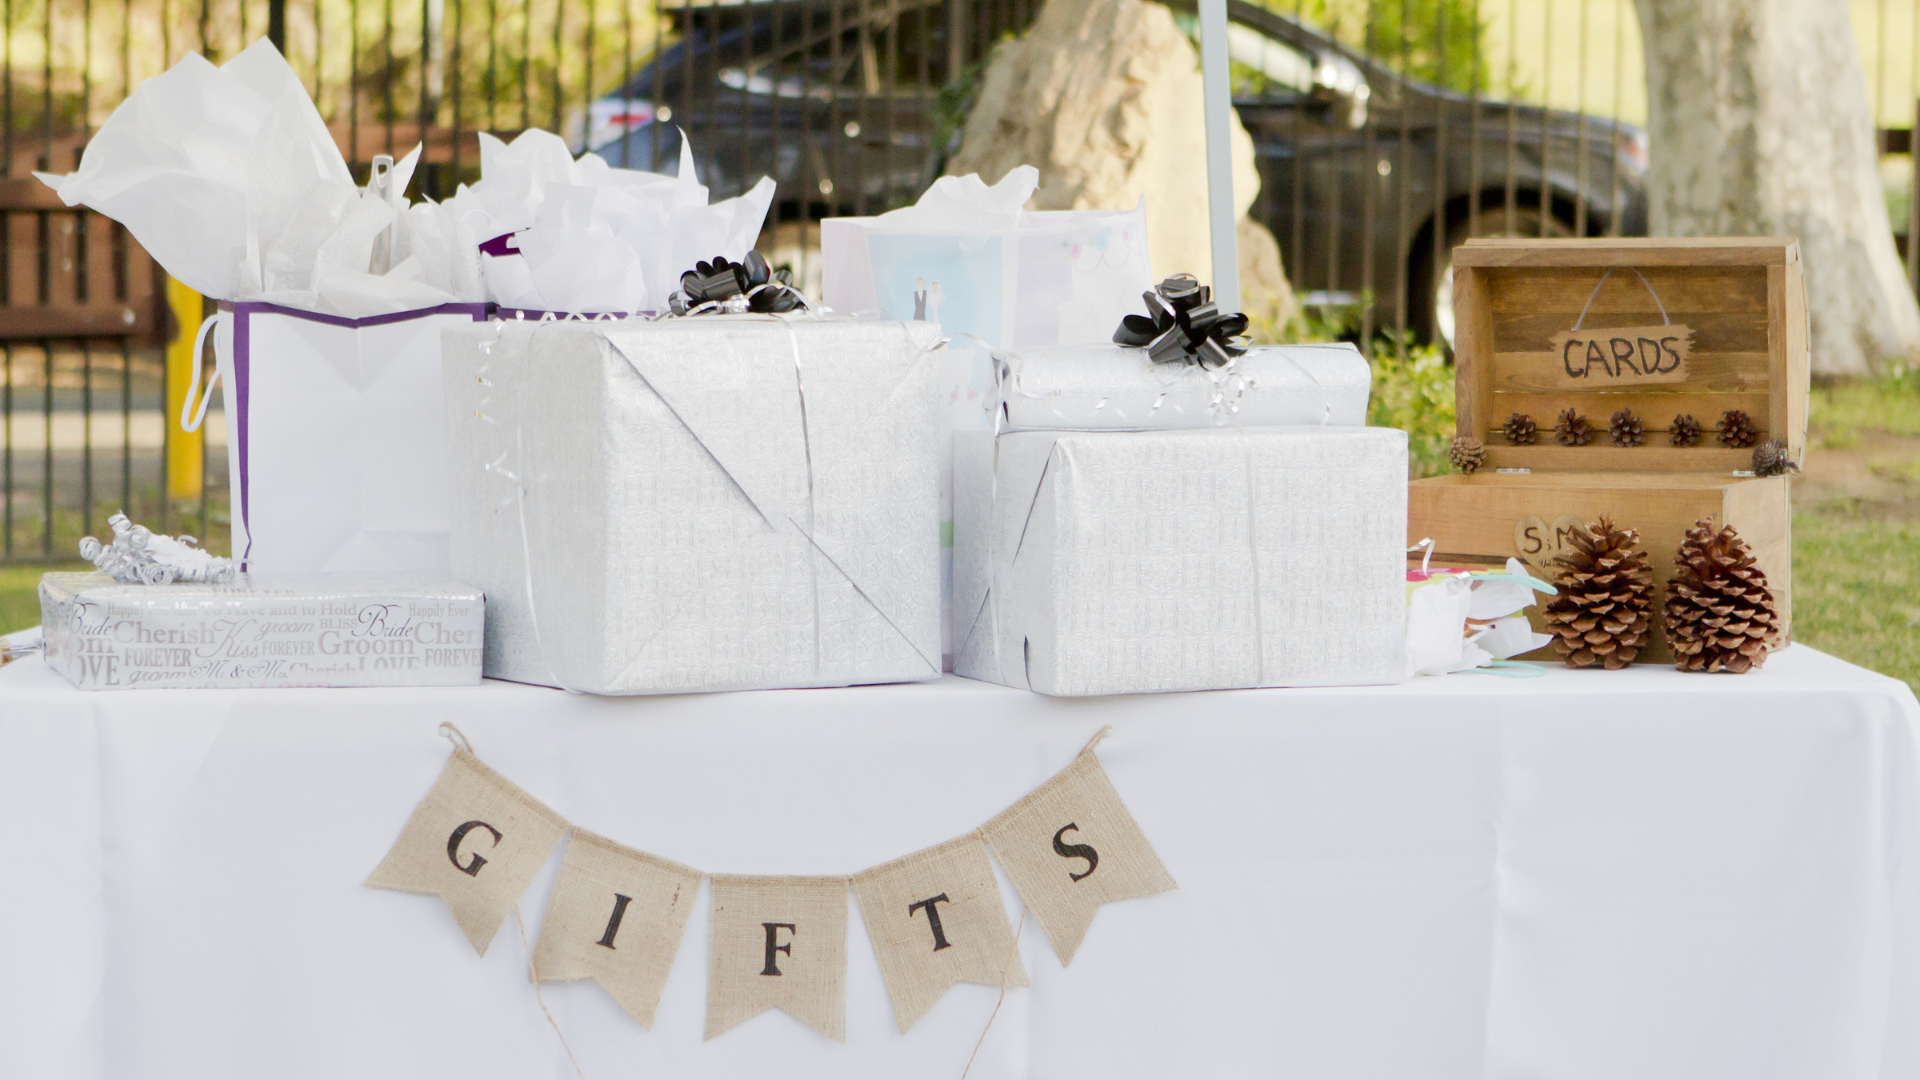 Wedding Gifts and Cards on a Table